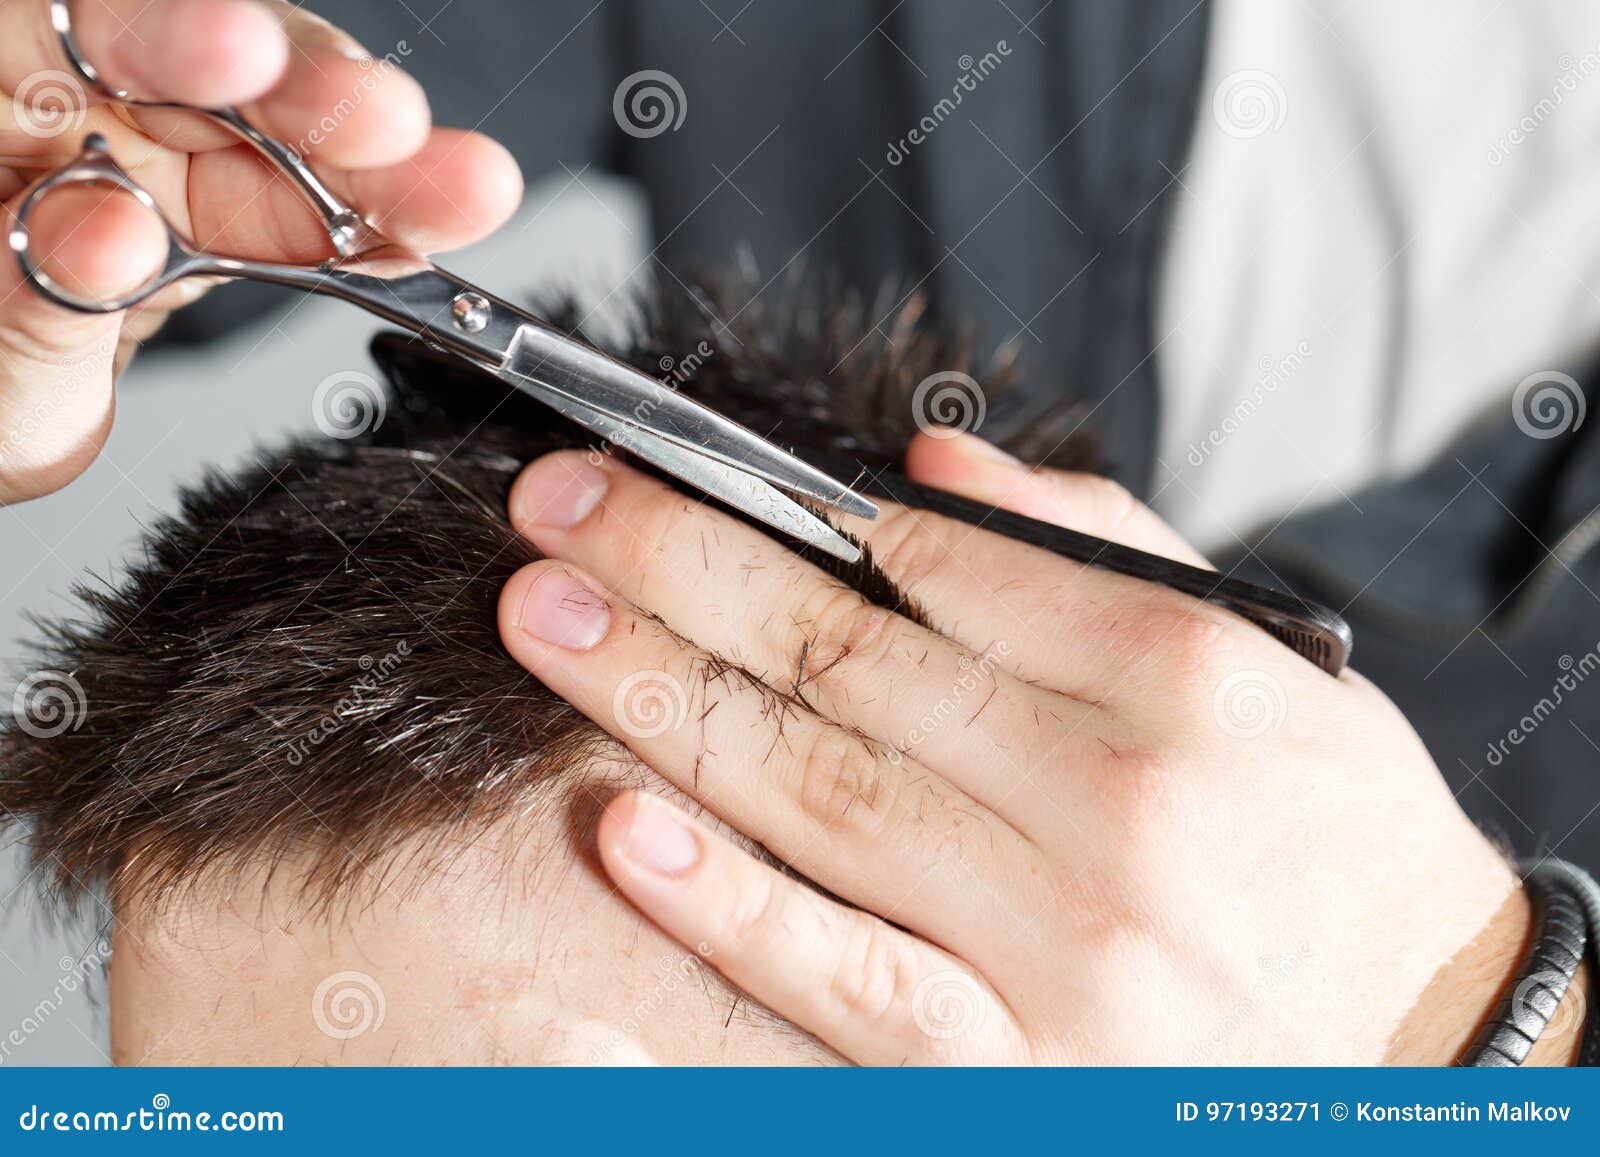 men's haircut with clippers and scissors